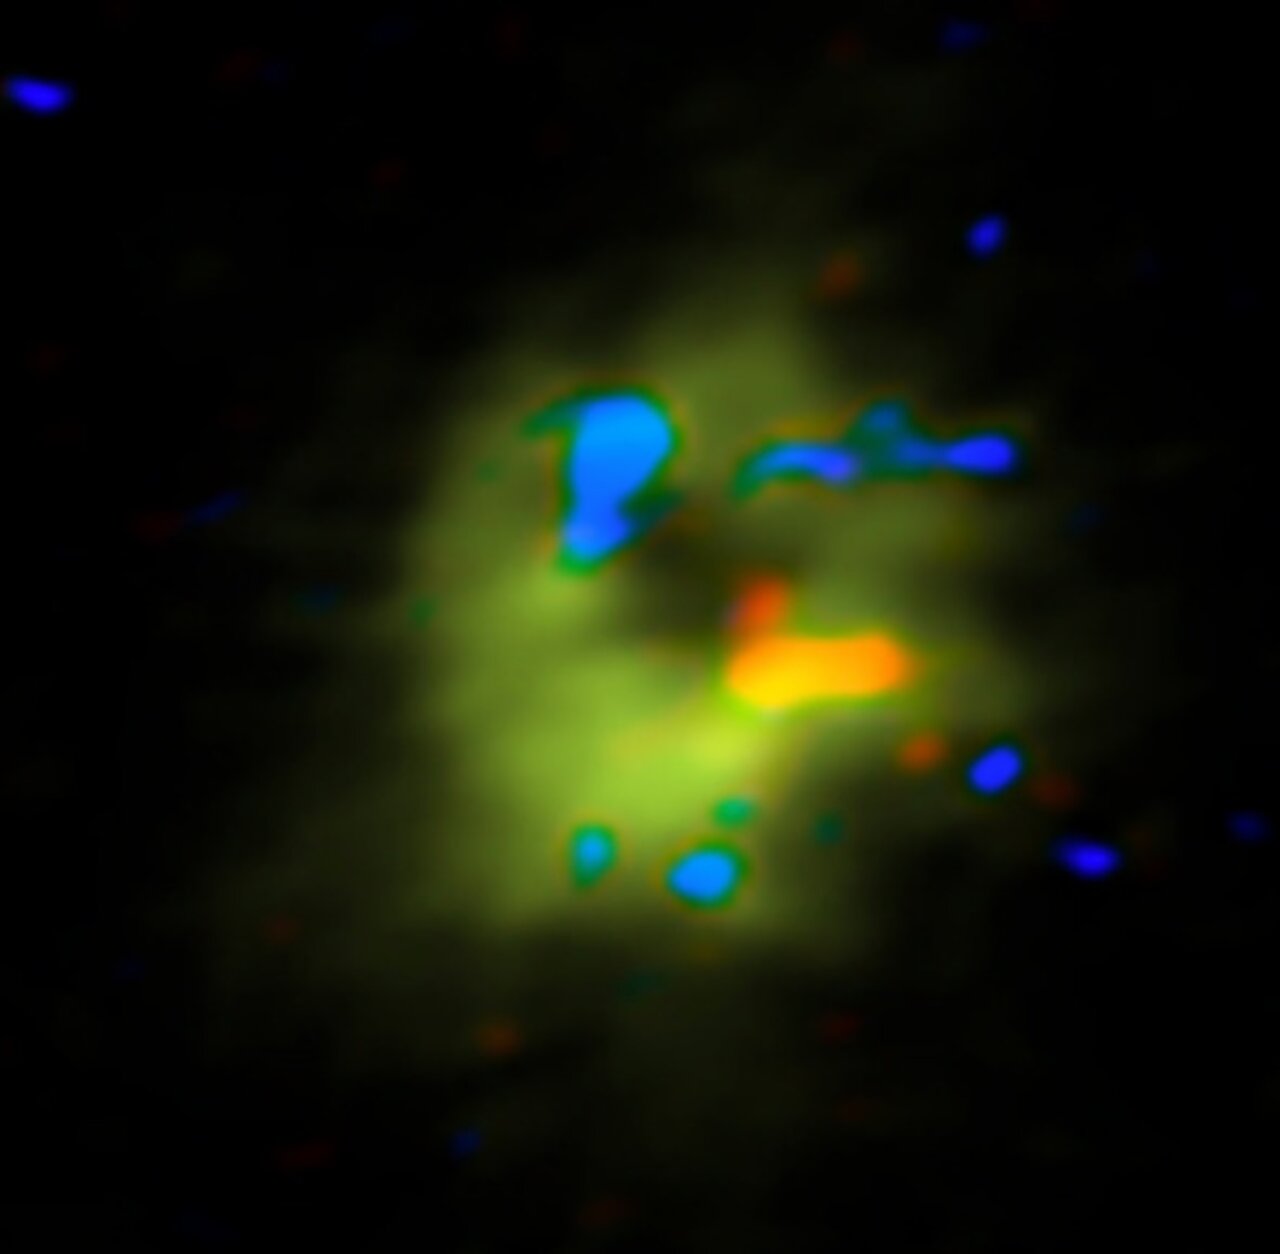 ALMA observations of the molecular gas disc around V605 Aquilae